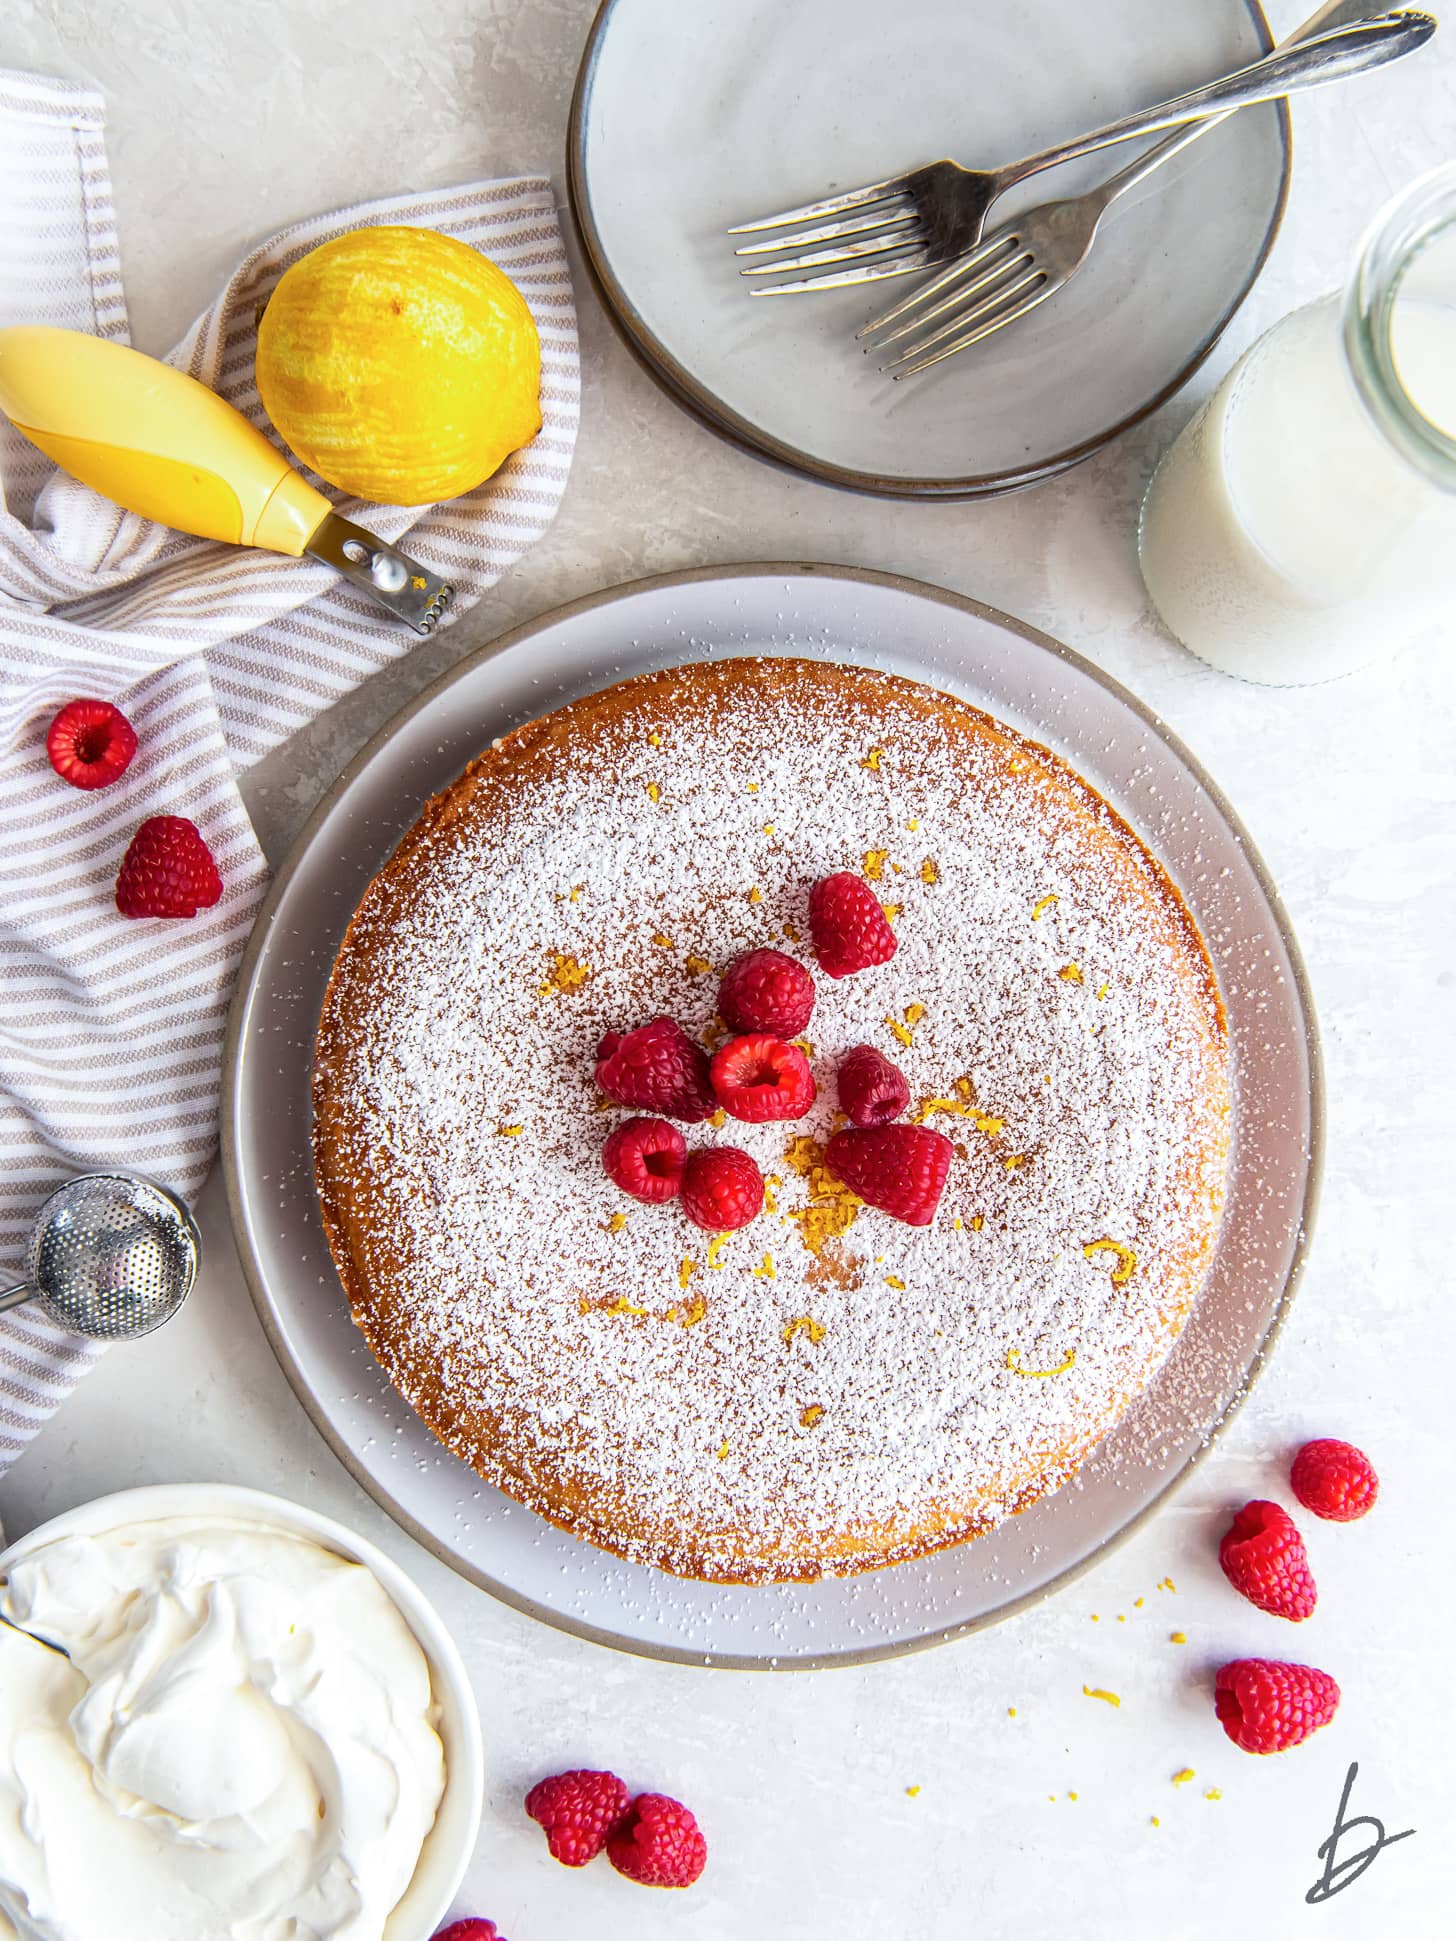 french yogurt cake with confectioners' sugar and raspberries as garnish.